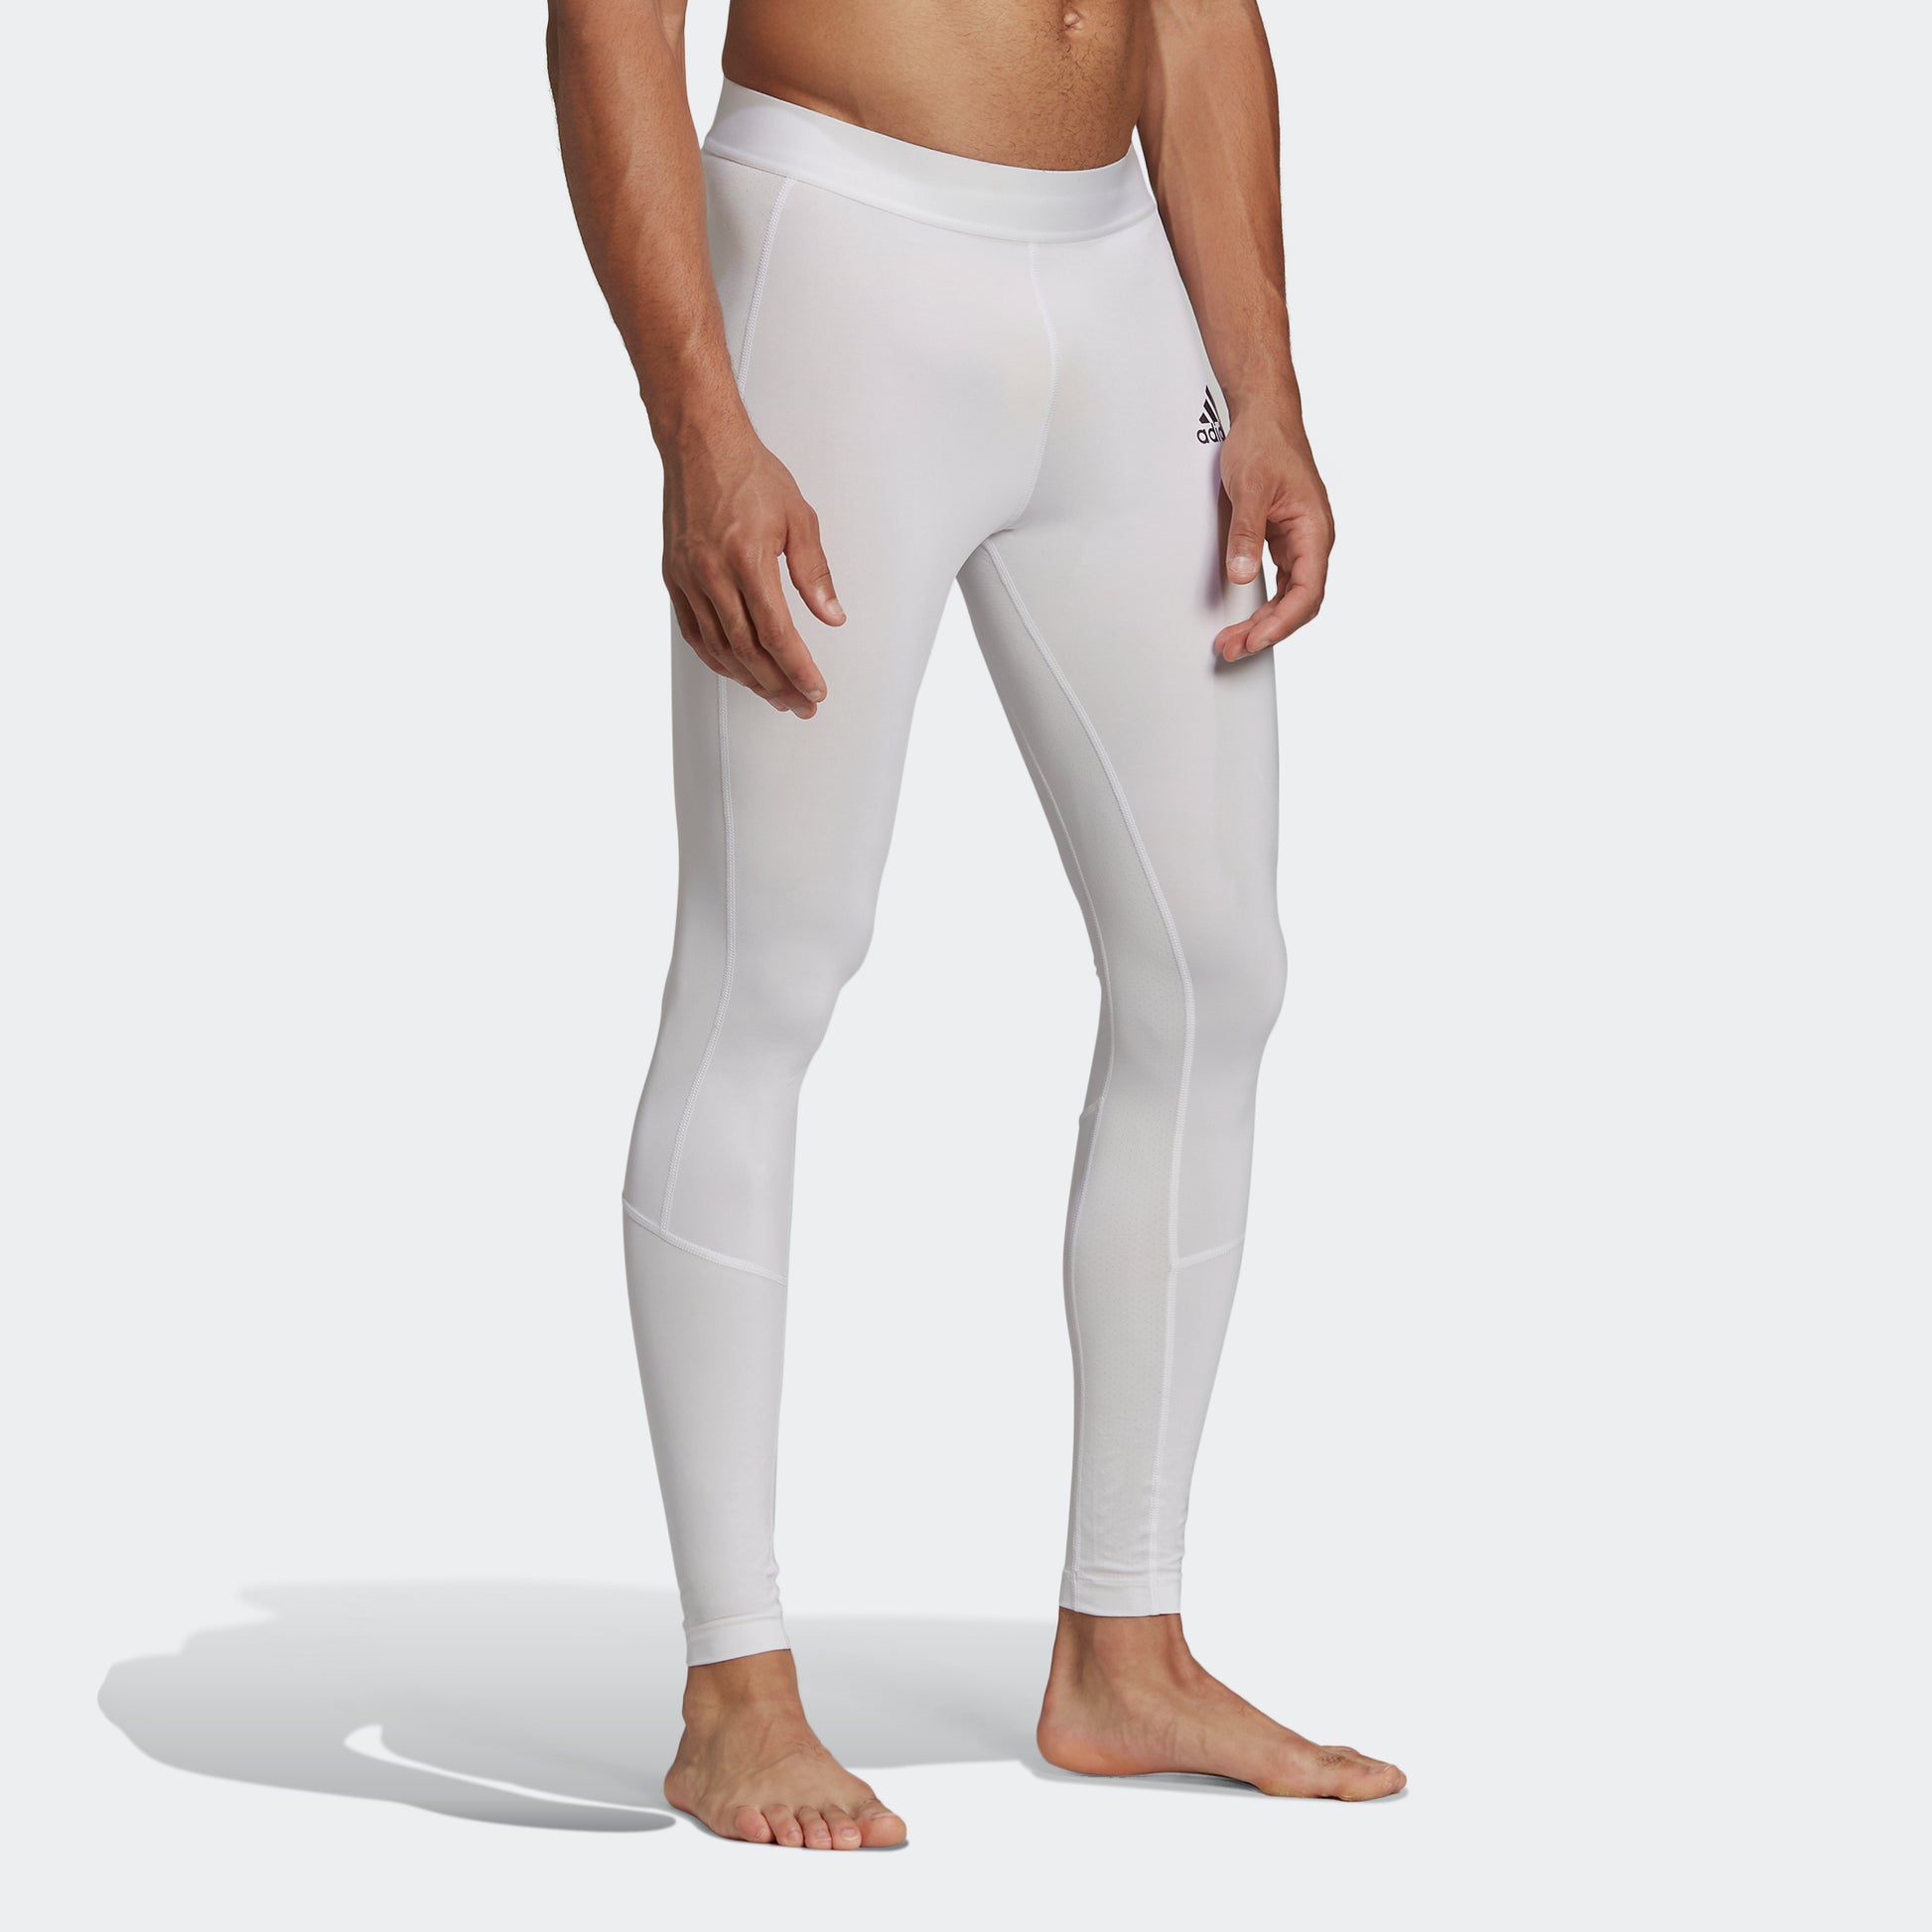  adidas Men's Techfit 3/4 Tights, White, Medium : Clothing,  Shoes & Jewelry